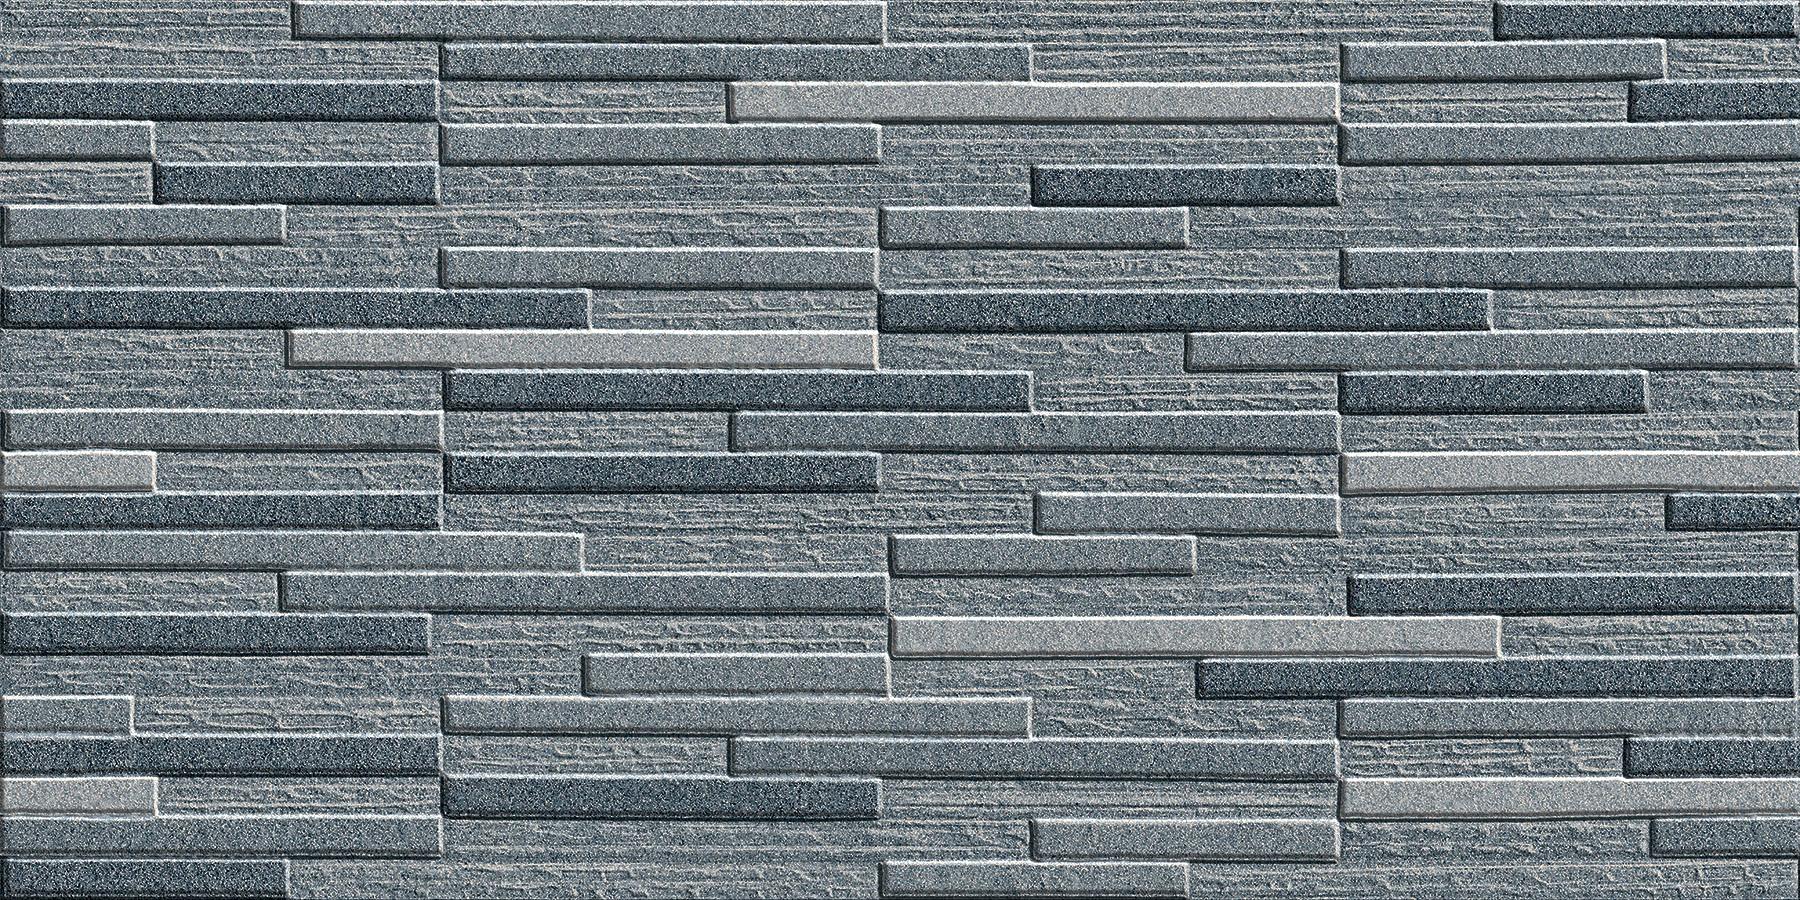 Stone Tiles for Bathroom Tiles, Living Room Tiles, Elevation Tiles, Accent Tiles, Hospital Tiles, Commercial/Office, Outdoor Area, School & Collages